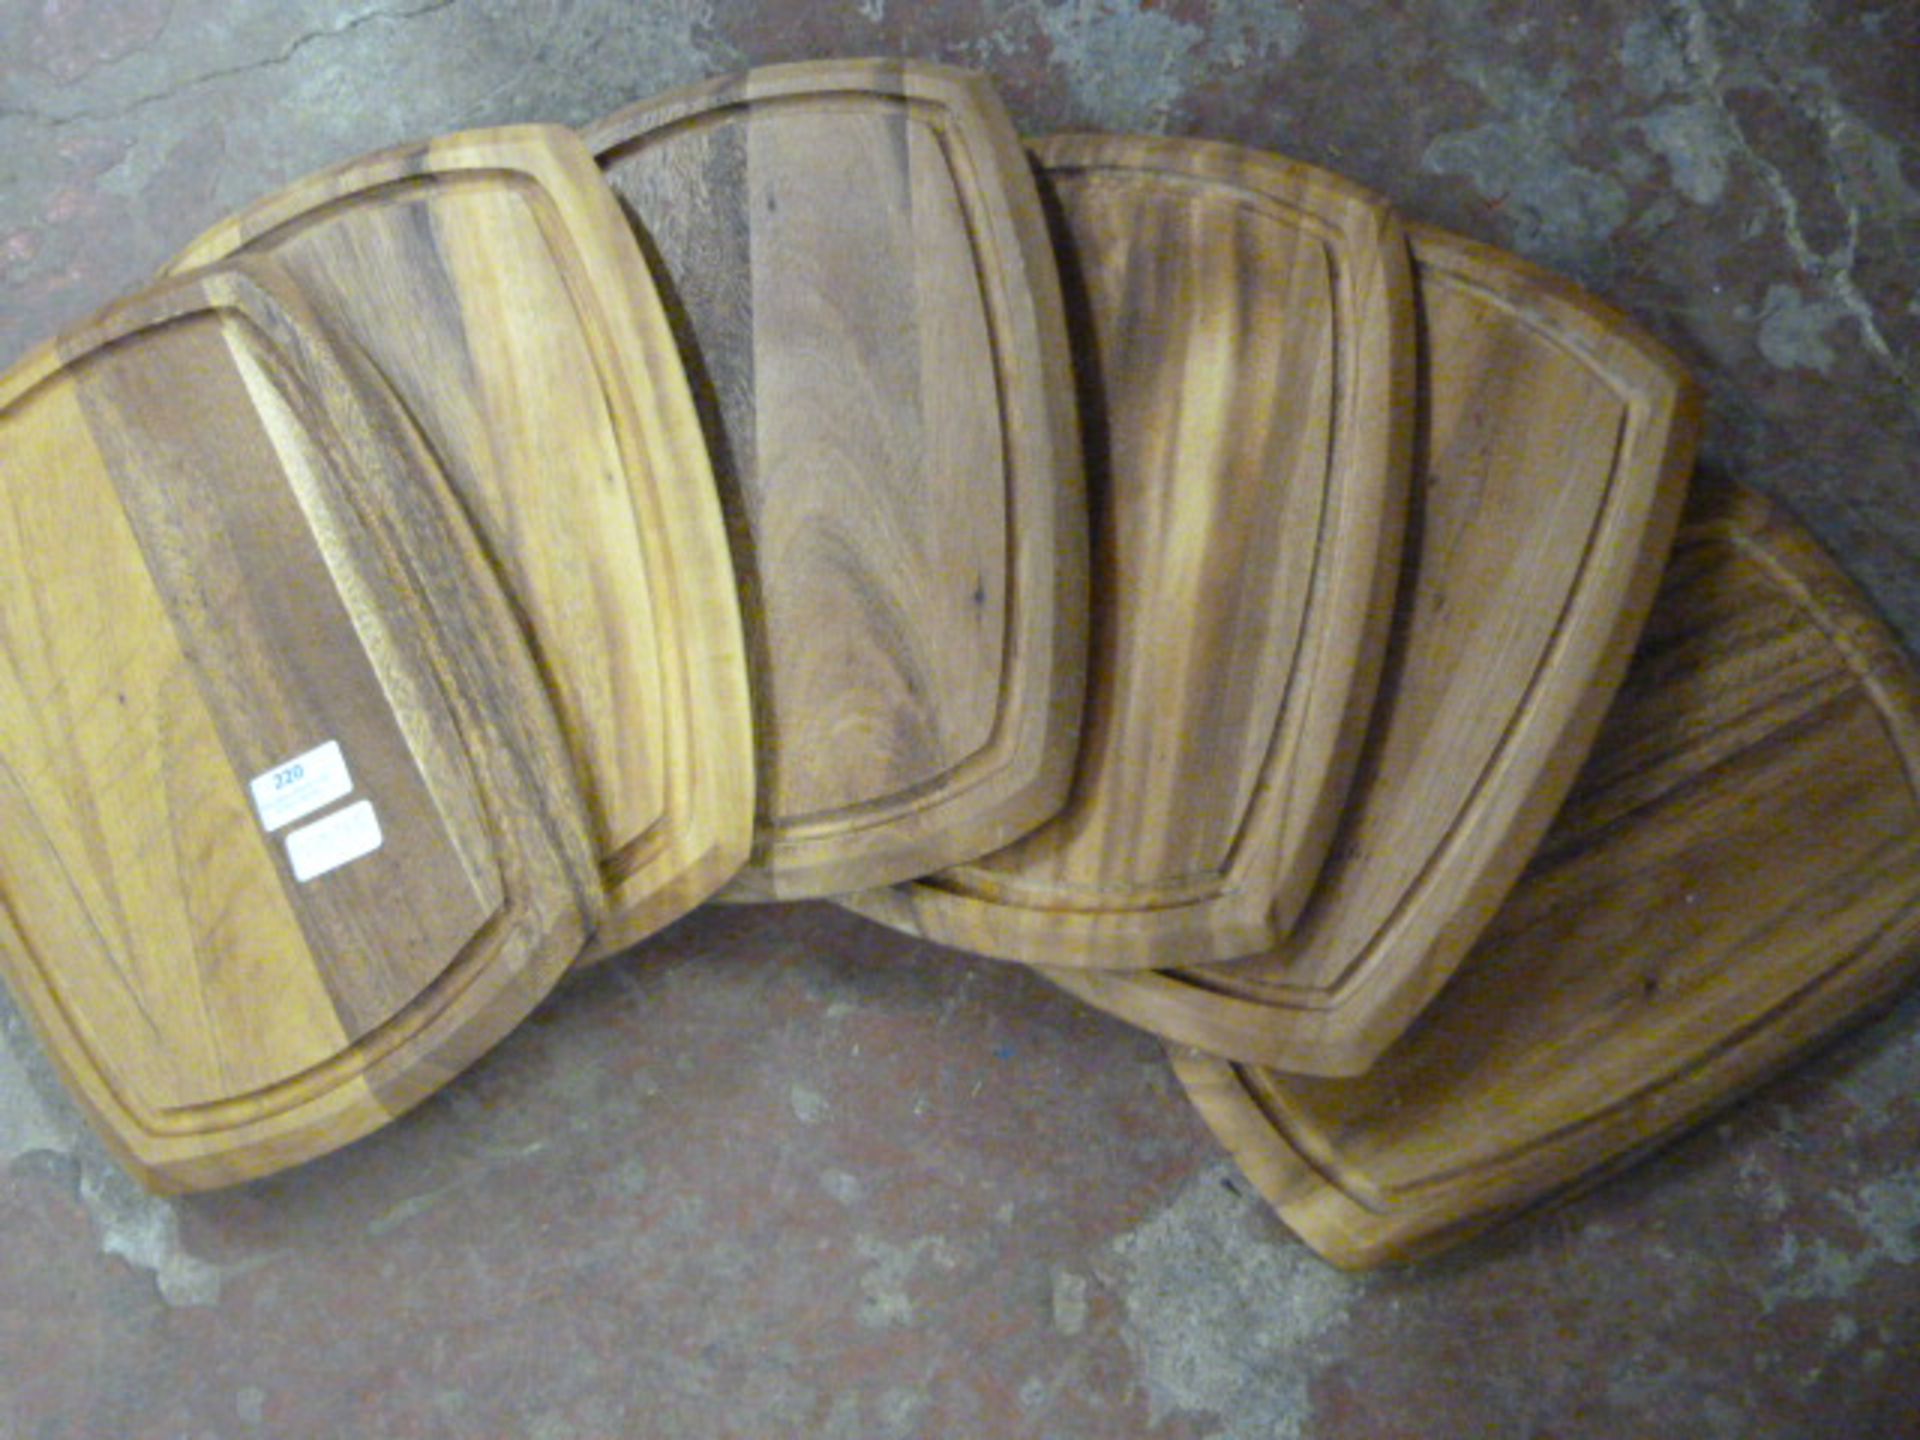 *Six Wooden Chopping/Cheese Boards